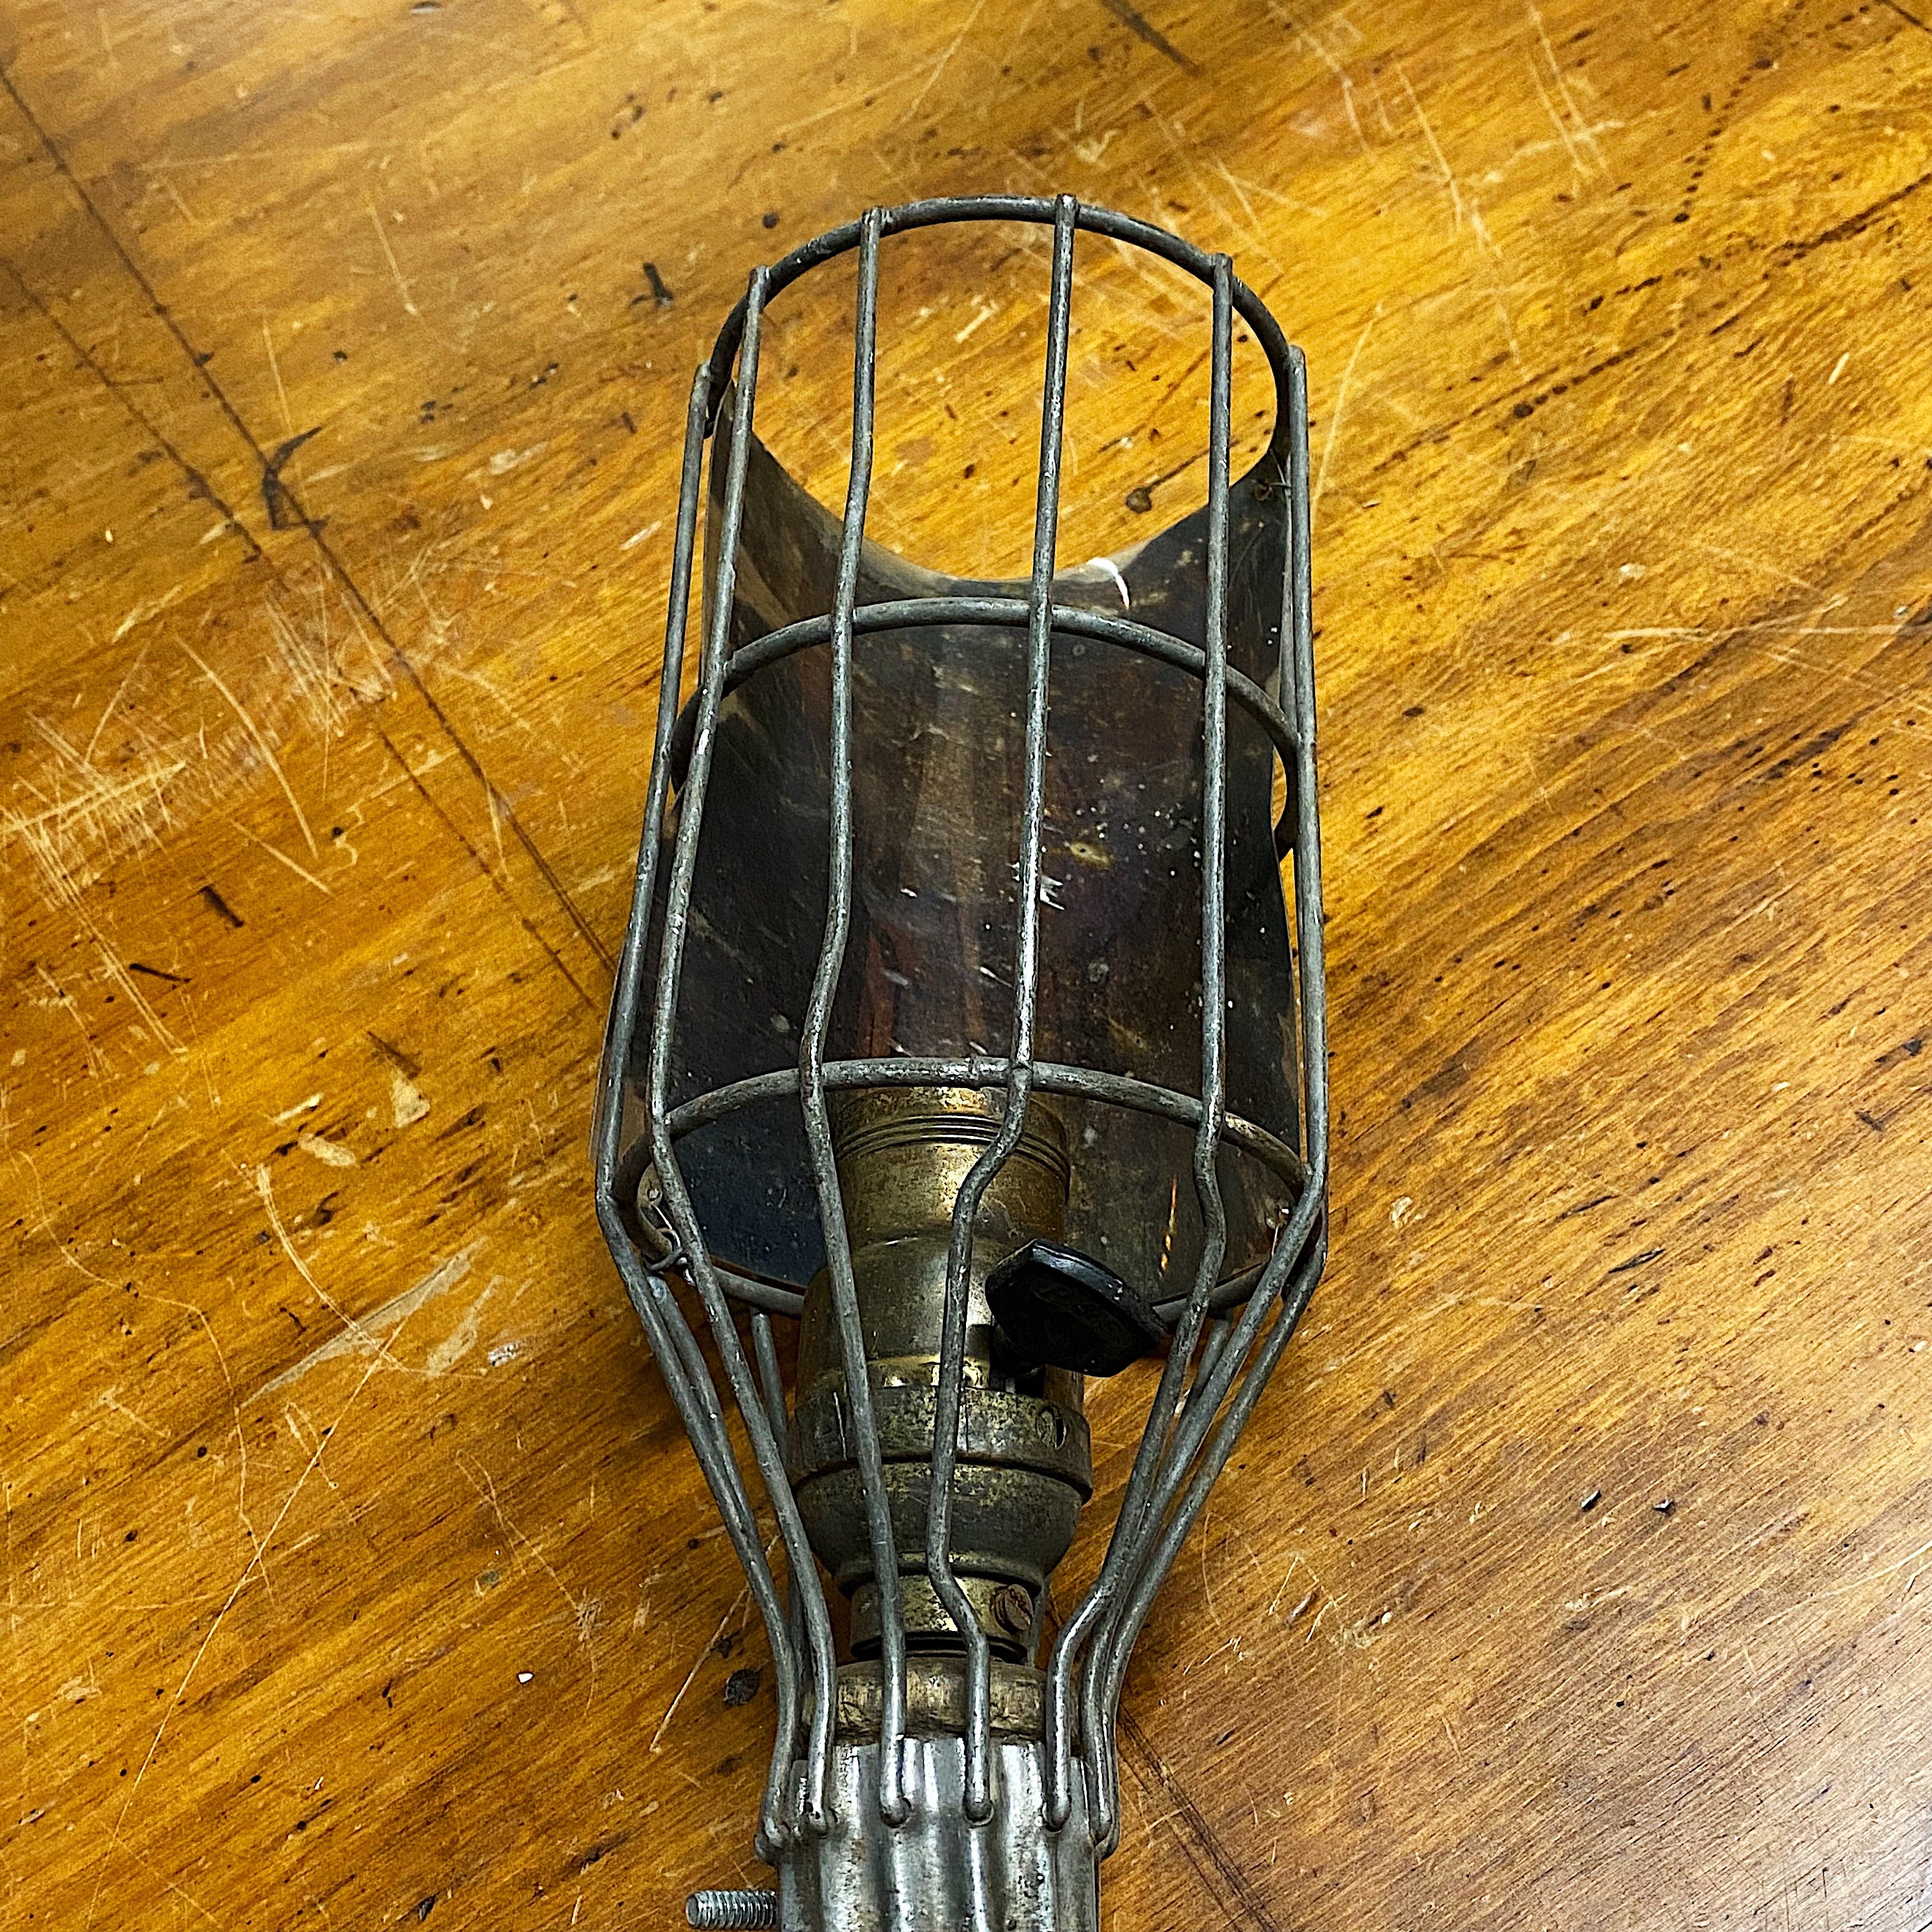 Antique Trouble Light with Wooden Handle | Early 1900s